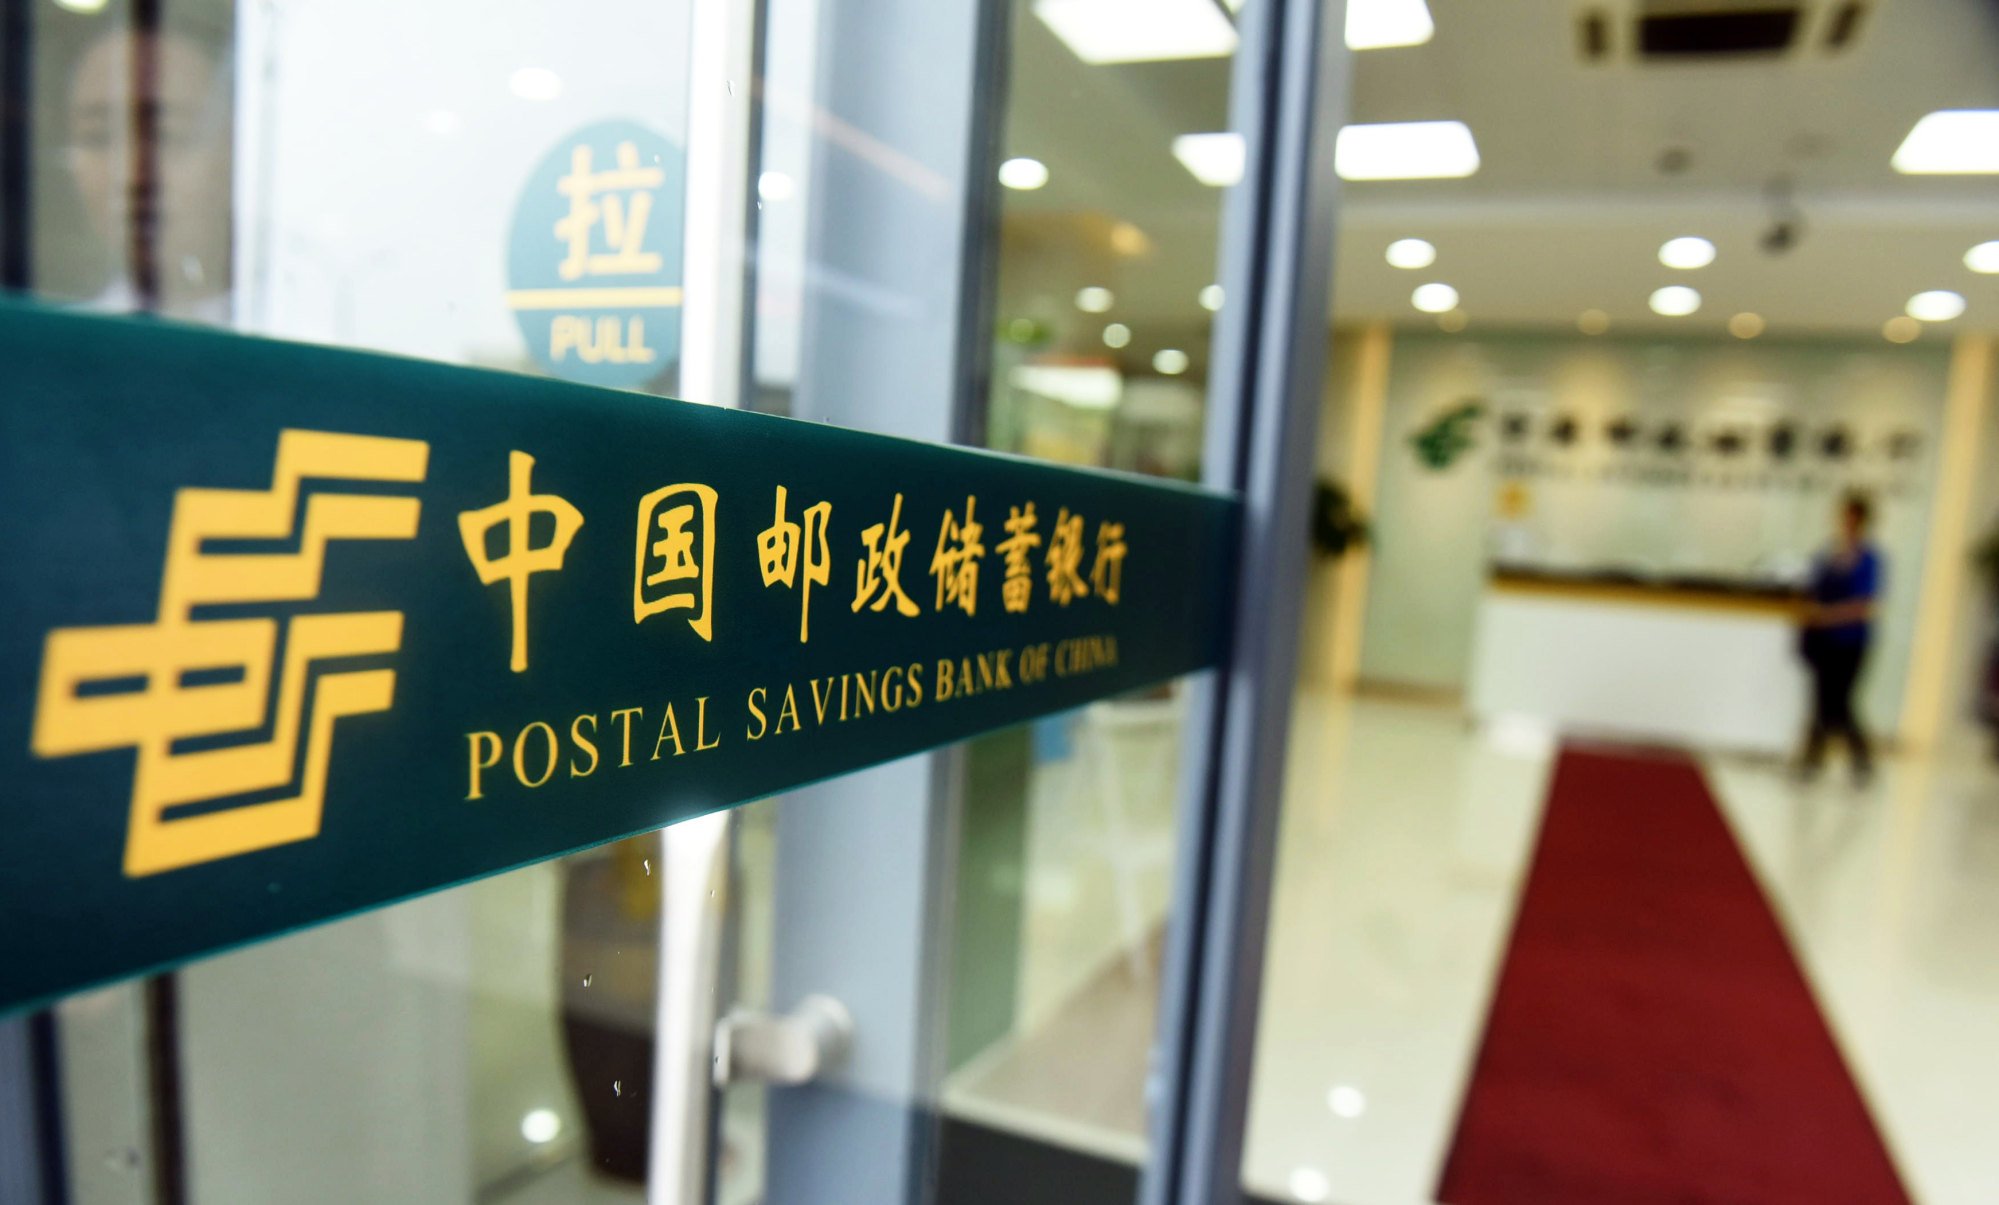 Postal Savings Bank of China said it would offer a loan quota of up to 50 billion yuan to Country Garden. Photo: AFP